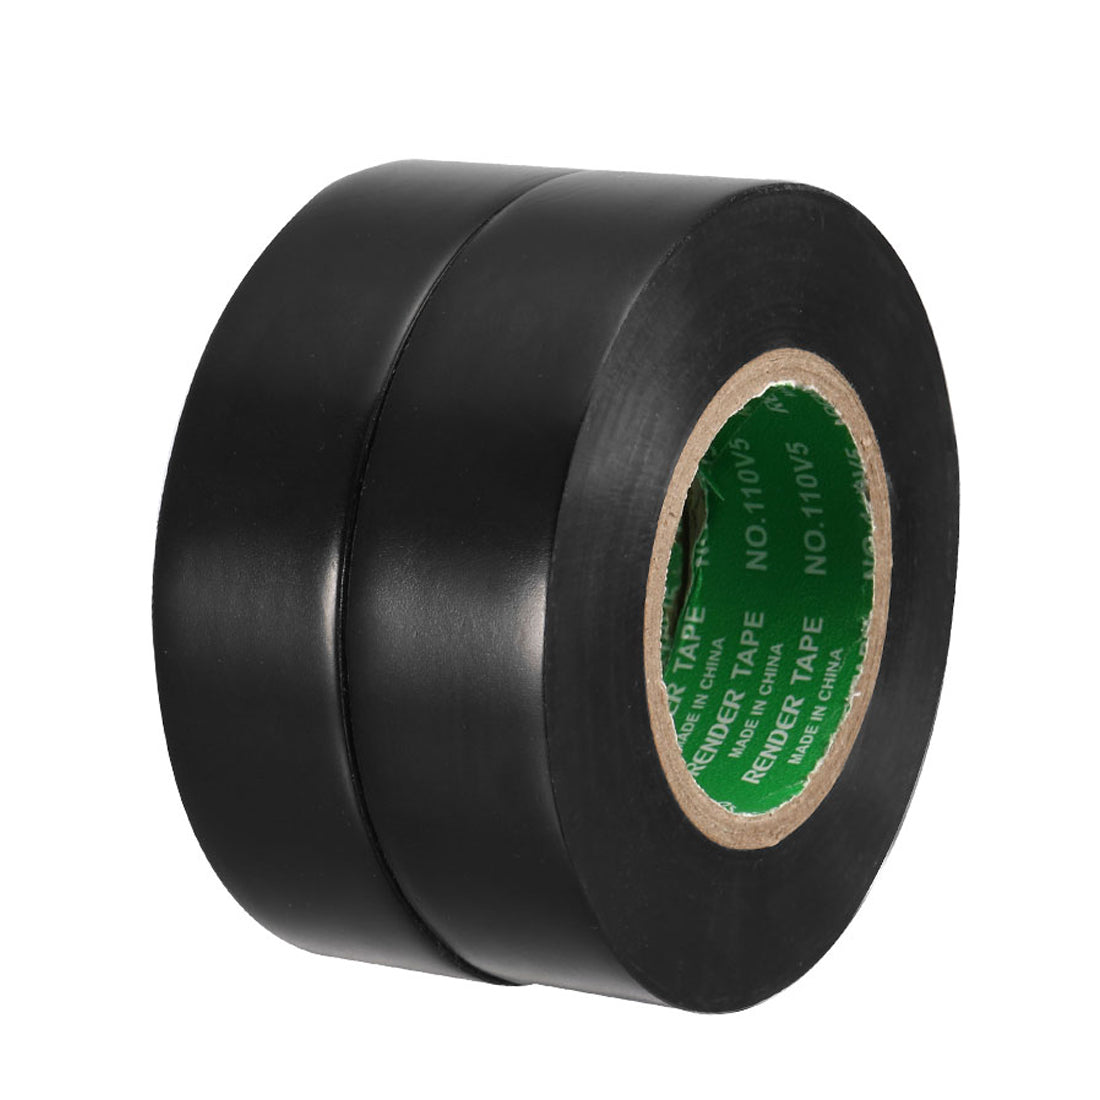 uxcell Uxcell Insulating Tape 18mm x20M x 0.1mm  PVC Electrical Tape Max. 600V Black 2pcs